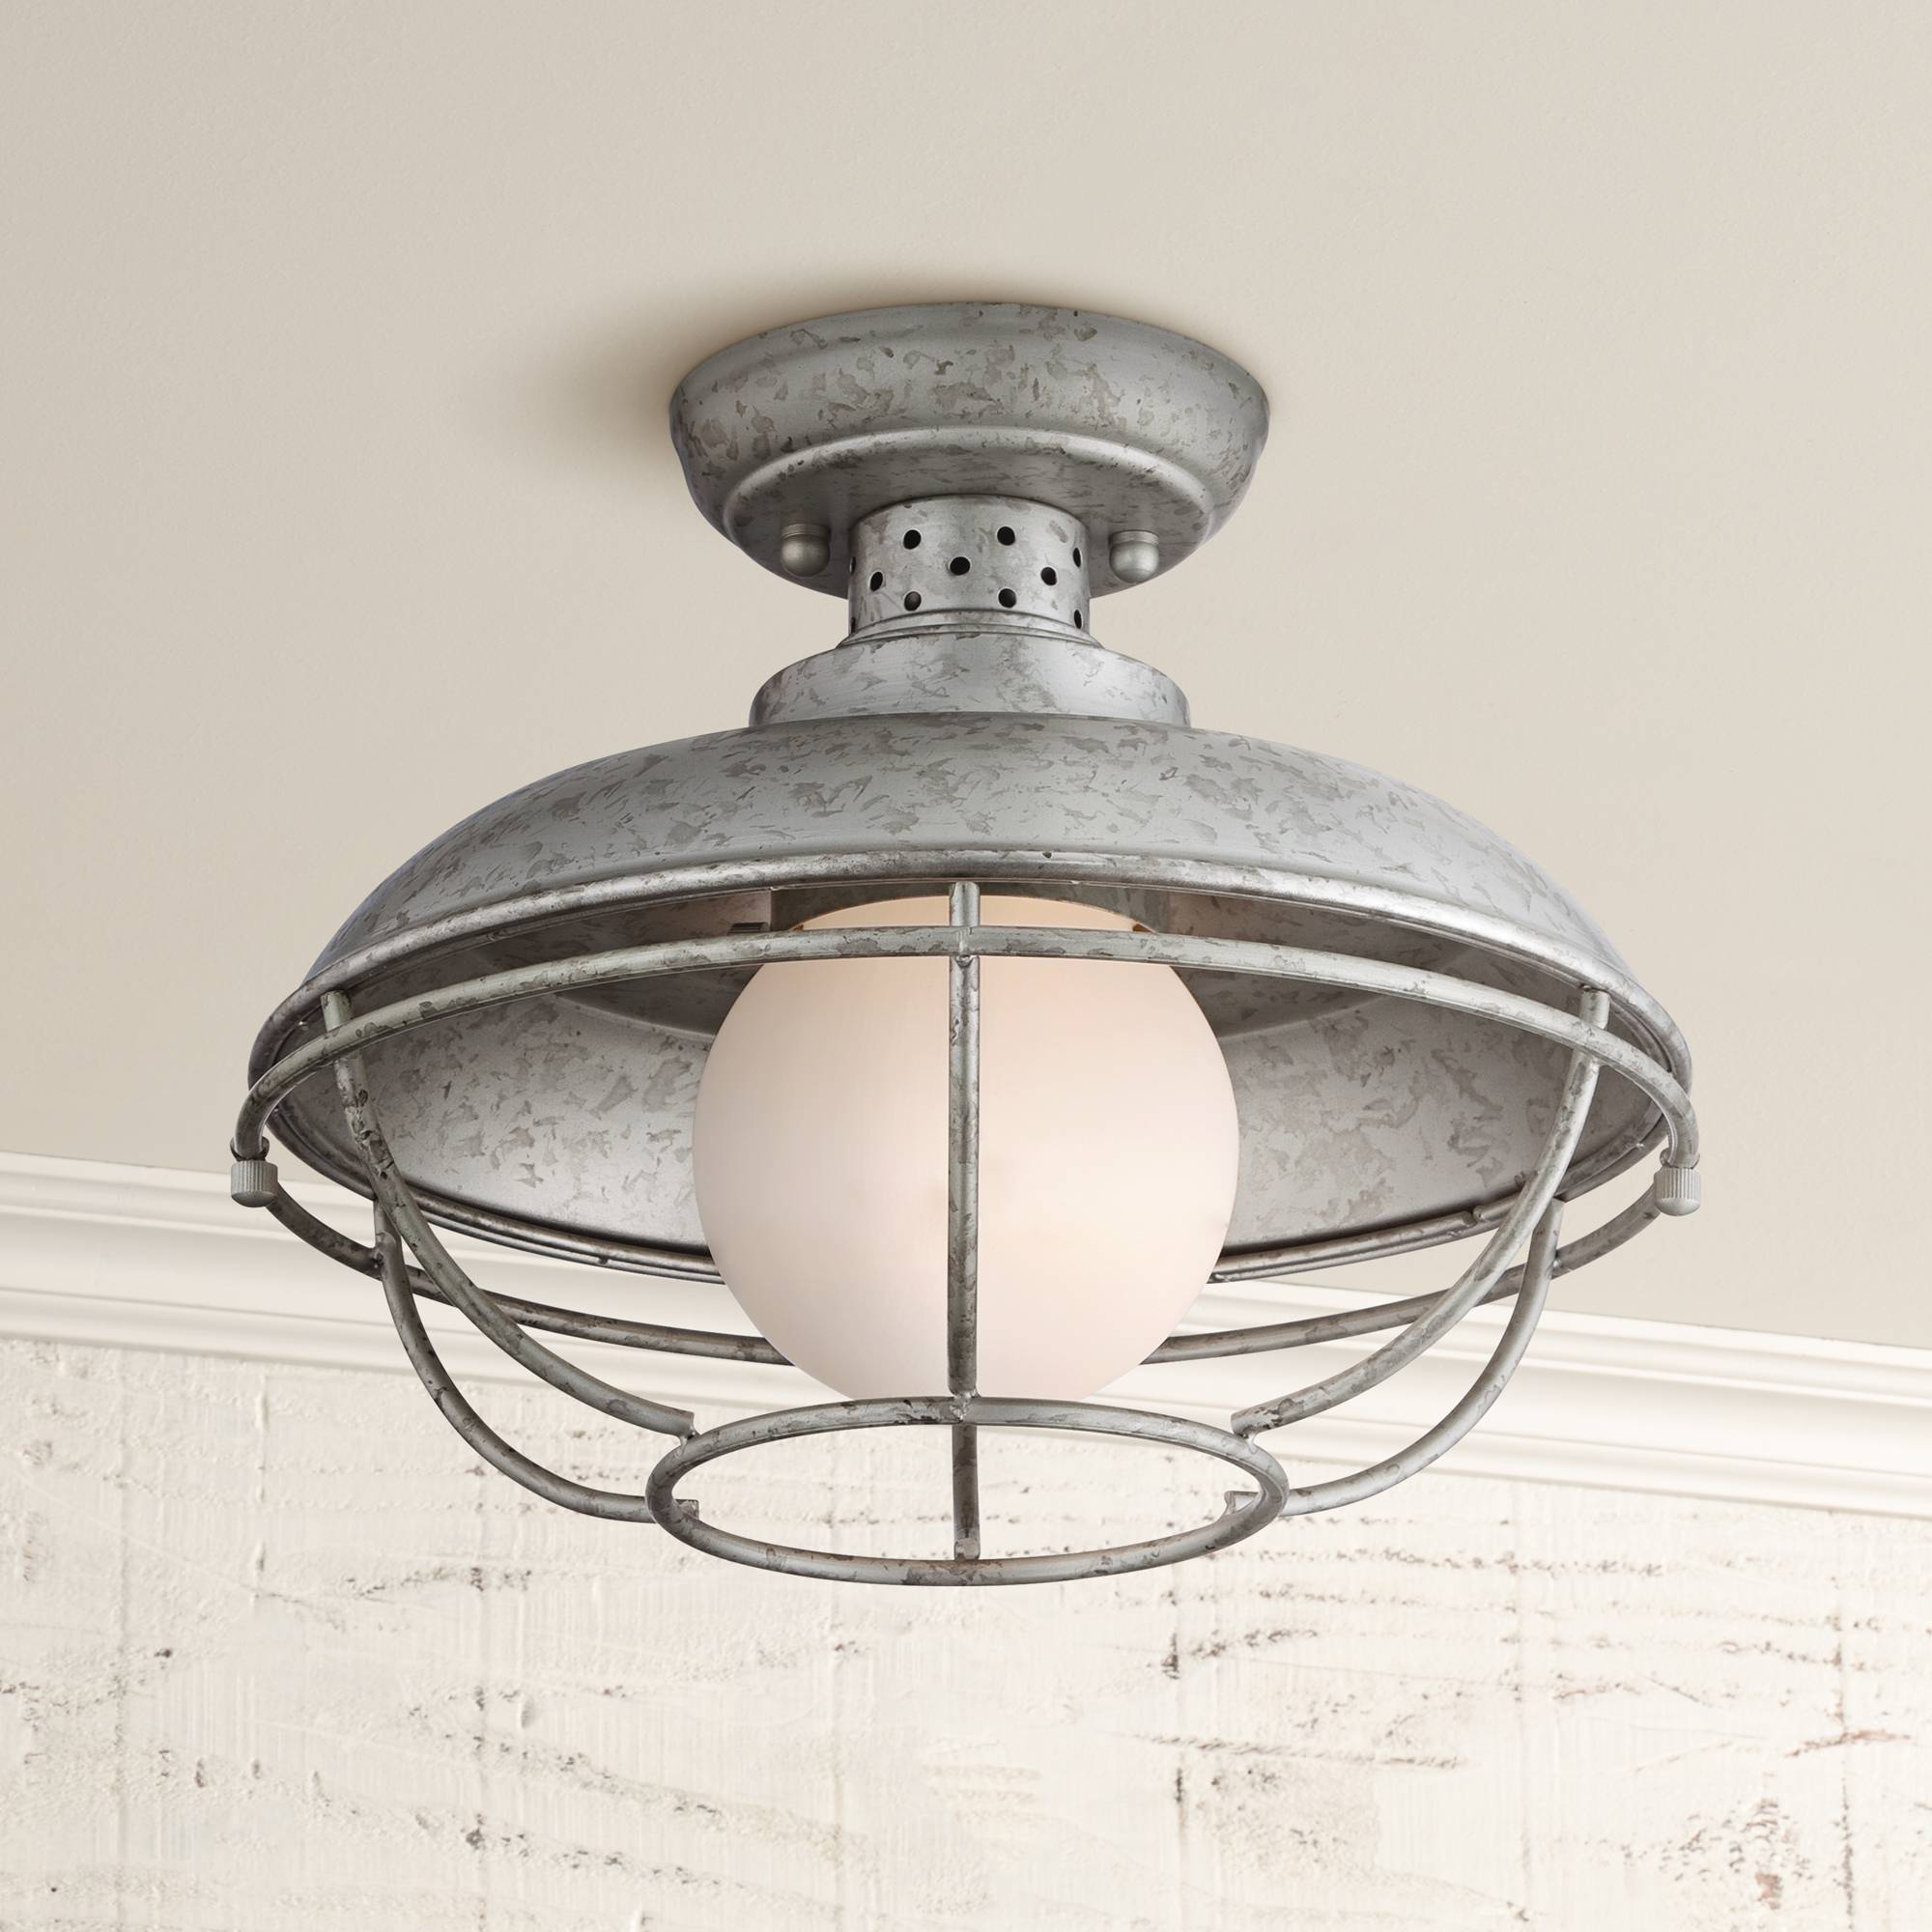 Details About Rustic Farmhouse Outdoor Ceiling Light Galvanized Steel Cage 12 For Porch Patio